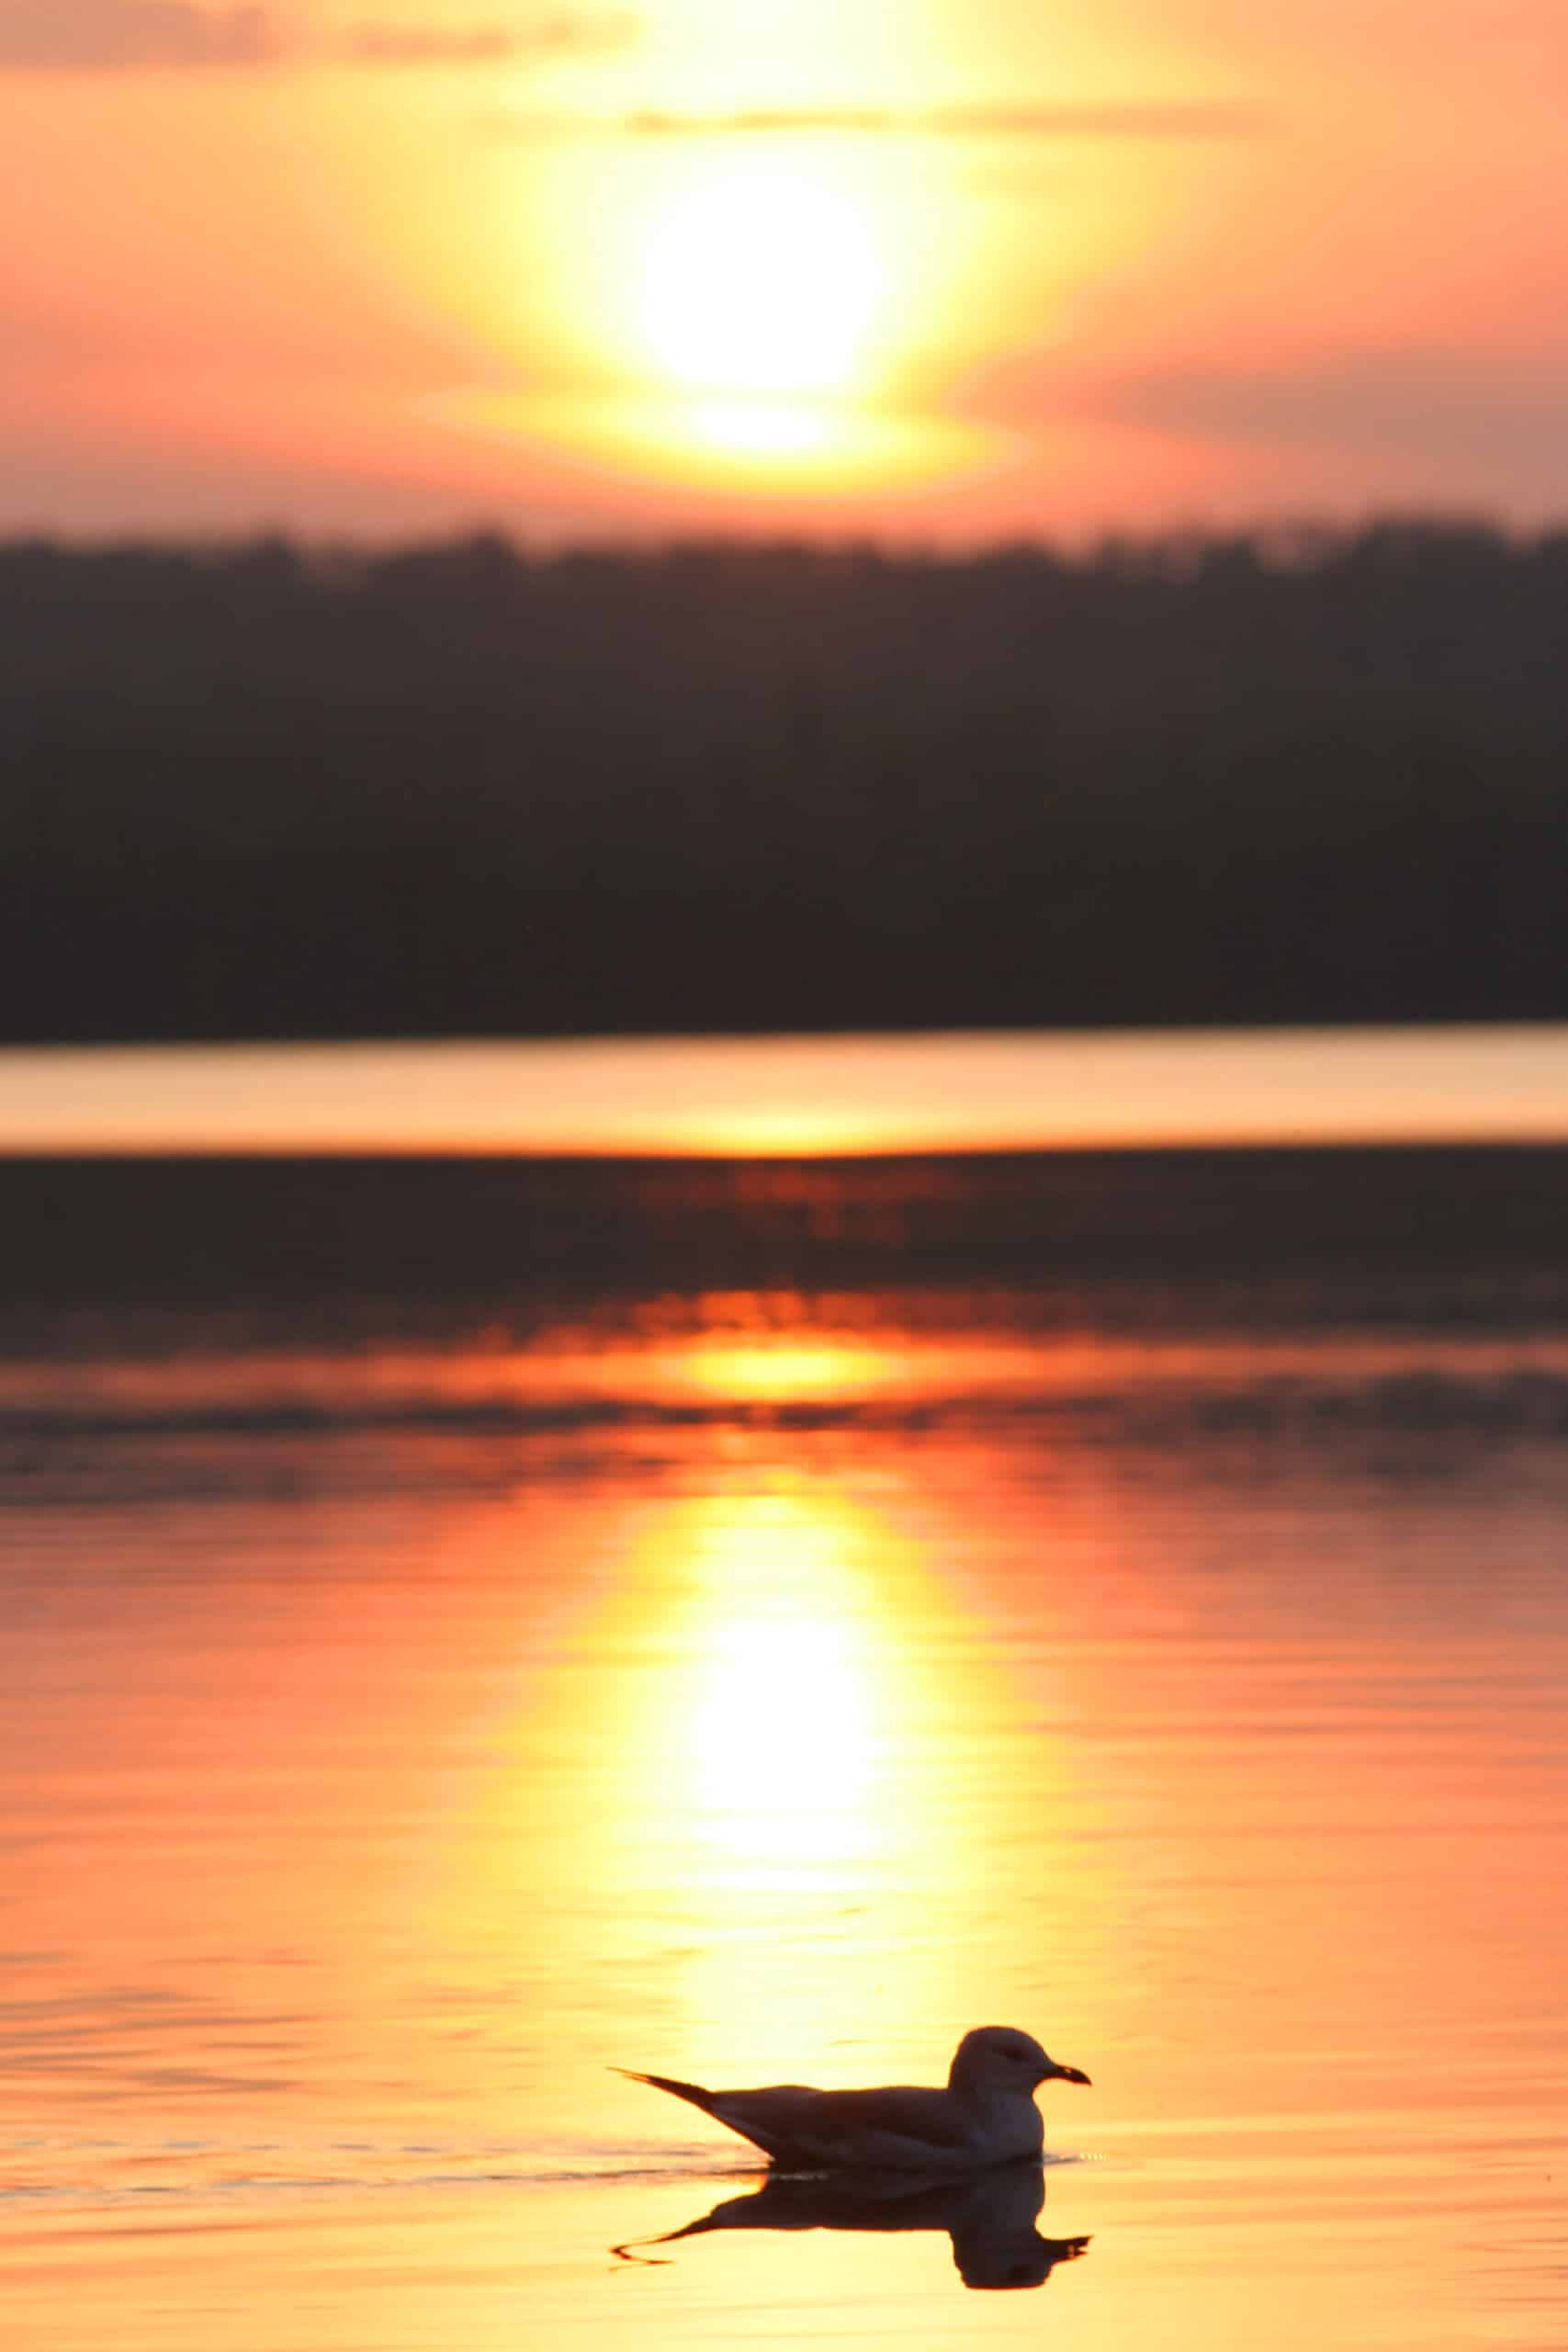 A very bright orange sunset over a lake.